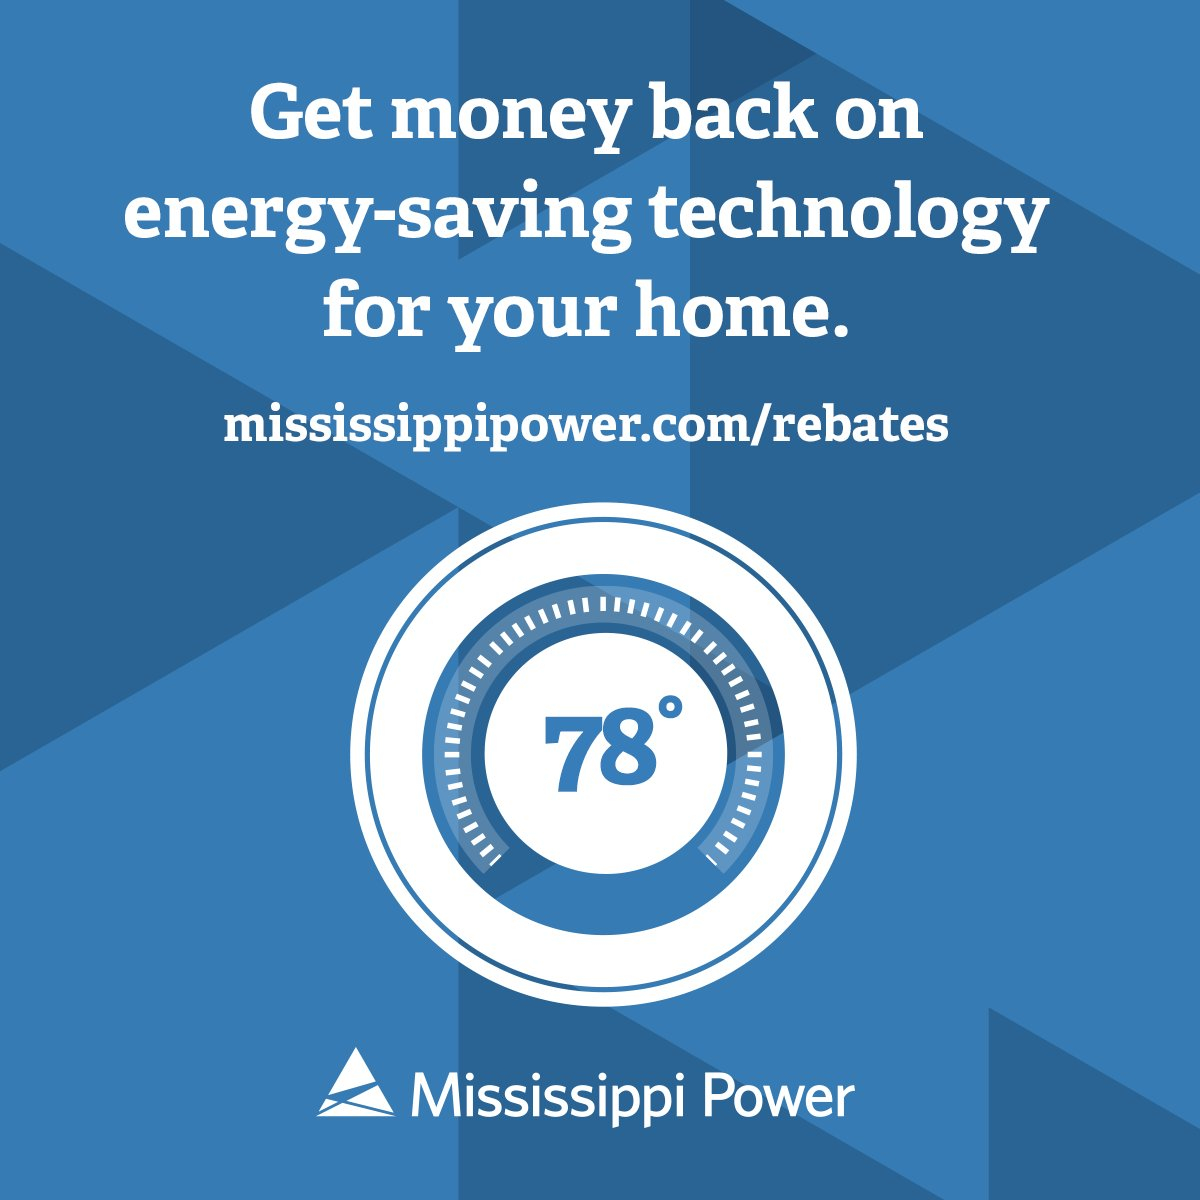 Mississippi Power On Twitter We Offer Several Mail in Rebates To Save